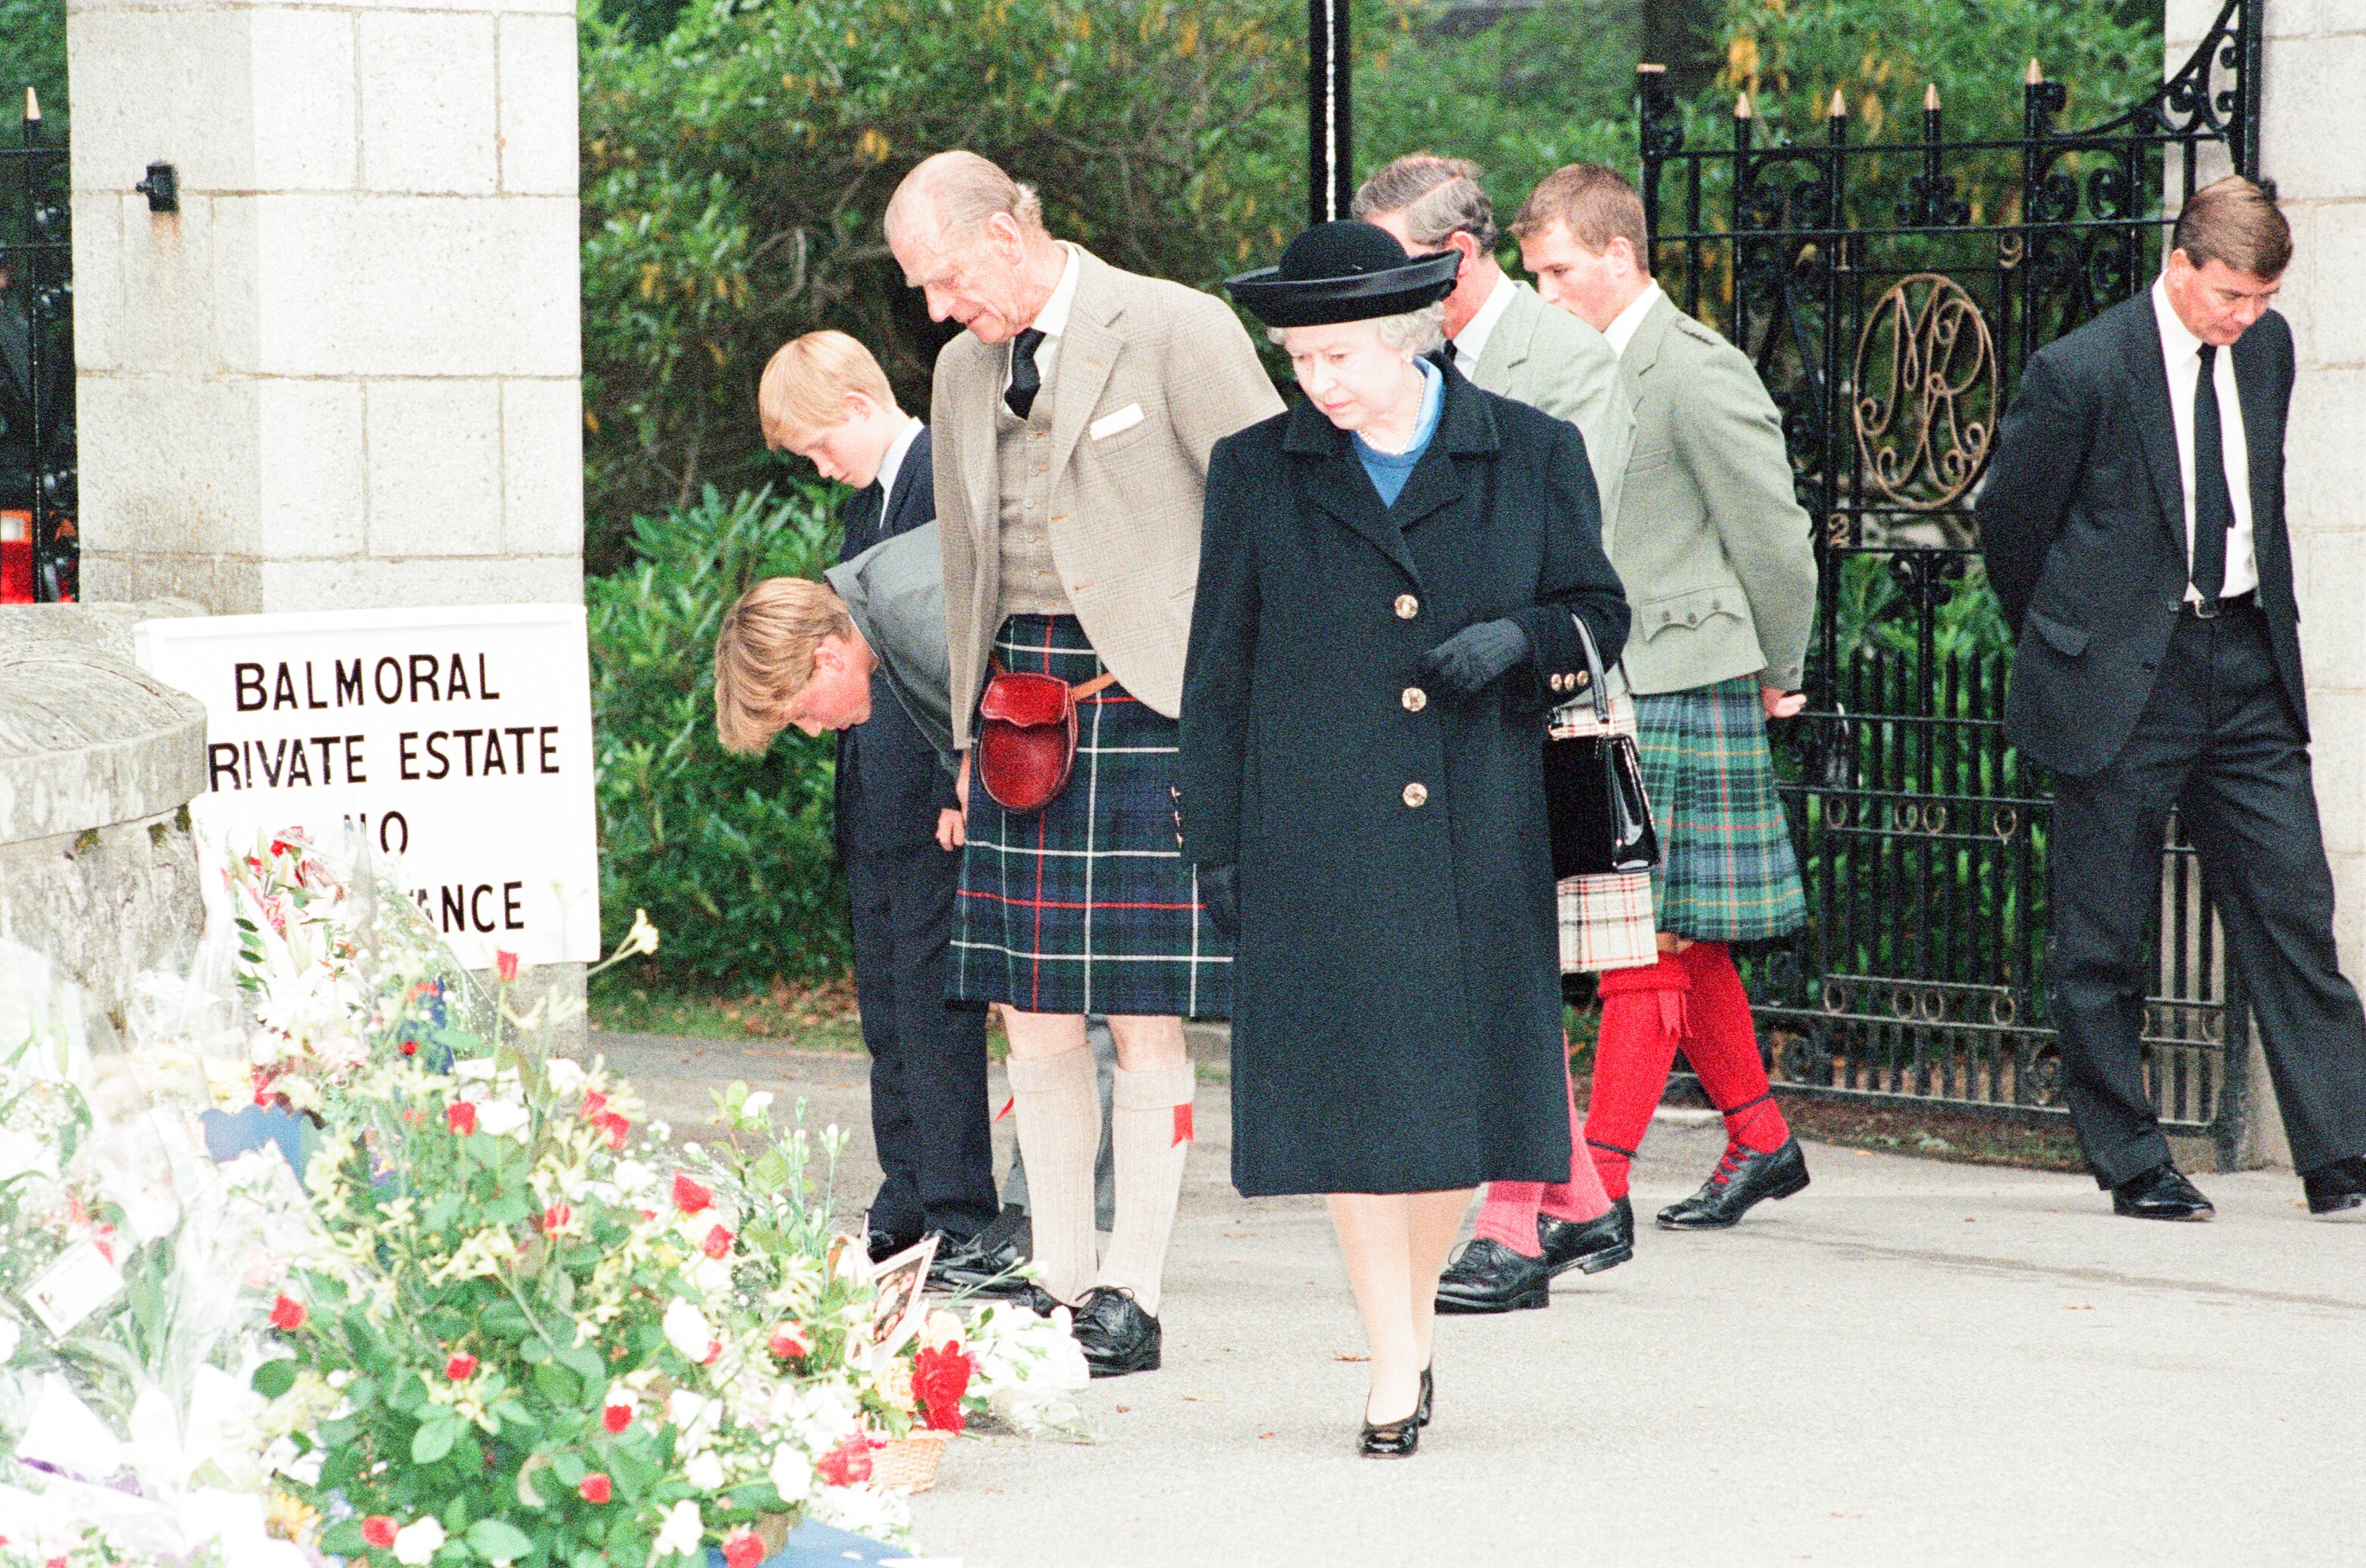 Queen Elizabeth II, Prince Philip, Prince Charles, Prince William, Prince Harry, and Peter Phillips at Balmoral Estate, Scotland, on September 5, 1997 | Source: Getty Images